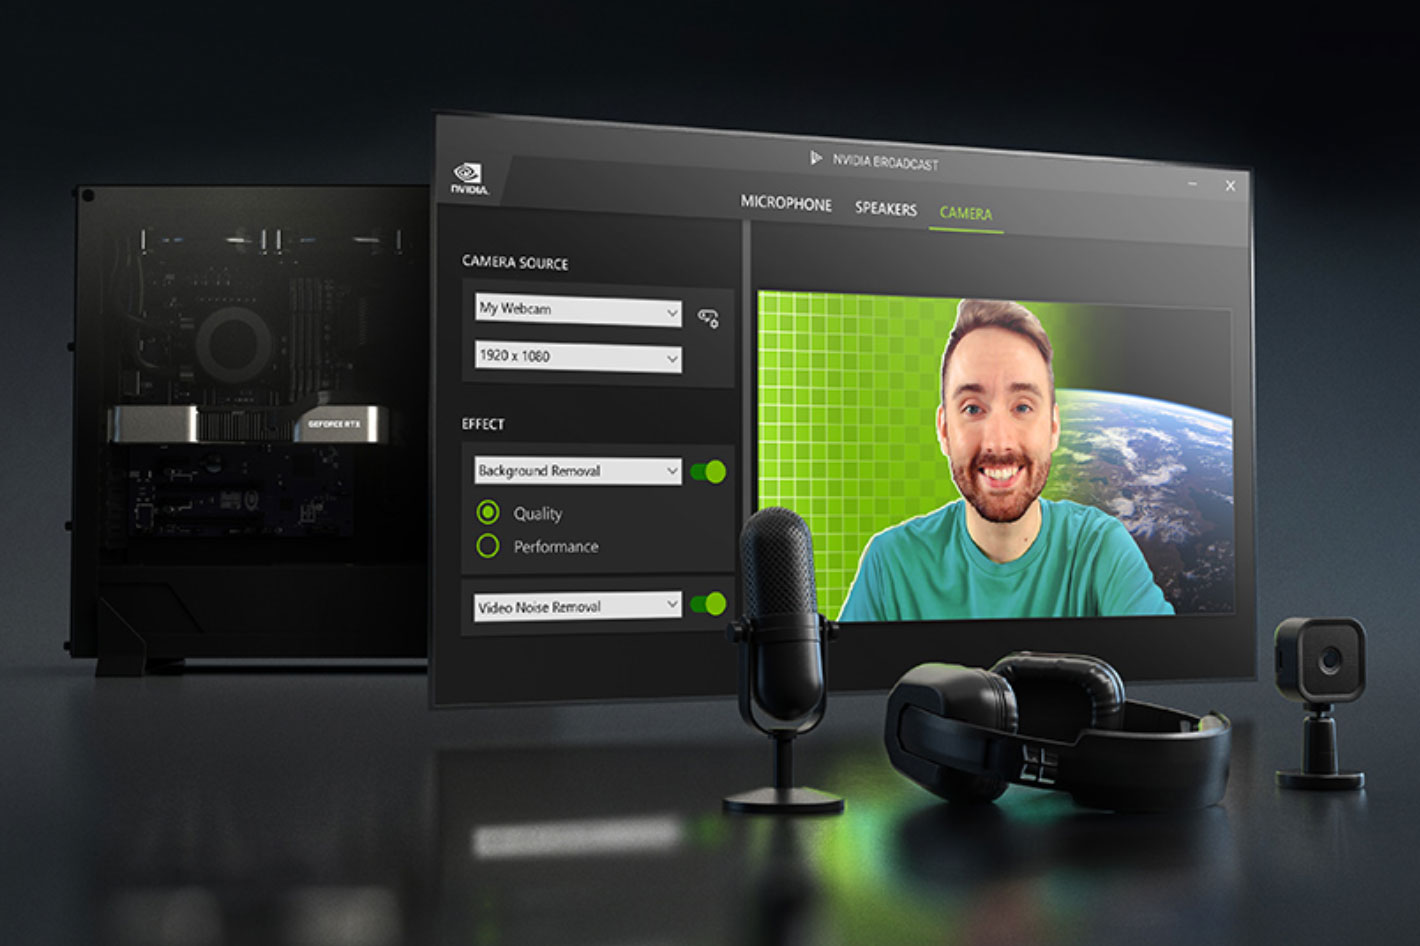 Is voice chat supported with GeForce NOW and how do I enable the microphone  on GeForce NOW?